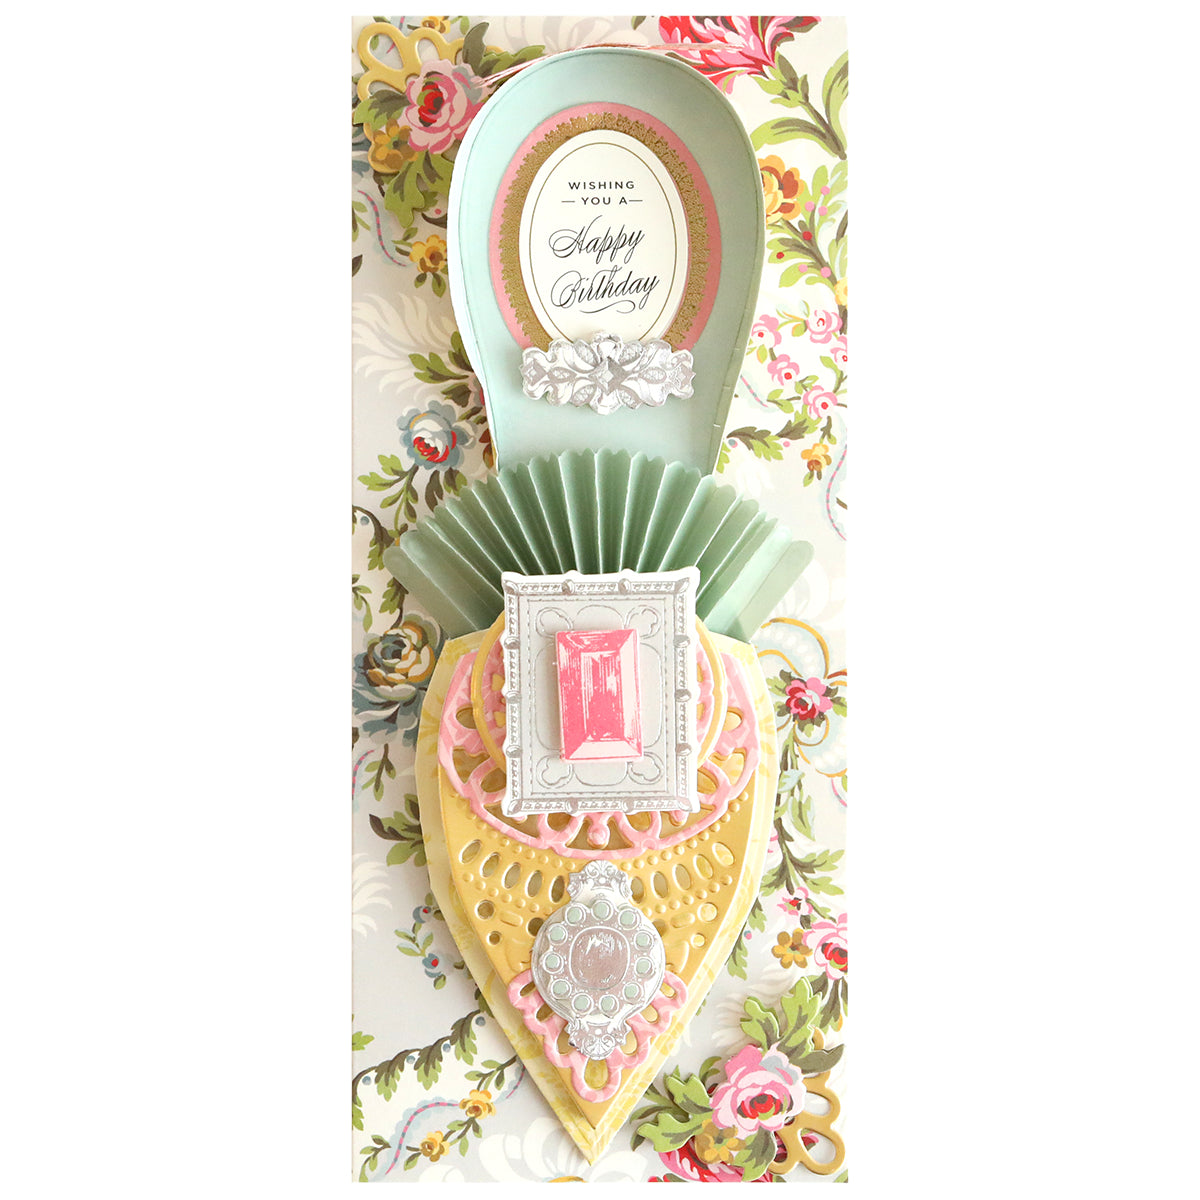 A decorative birthday card with Paper Shoe Dies patterns and a pop-up design.